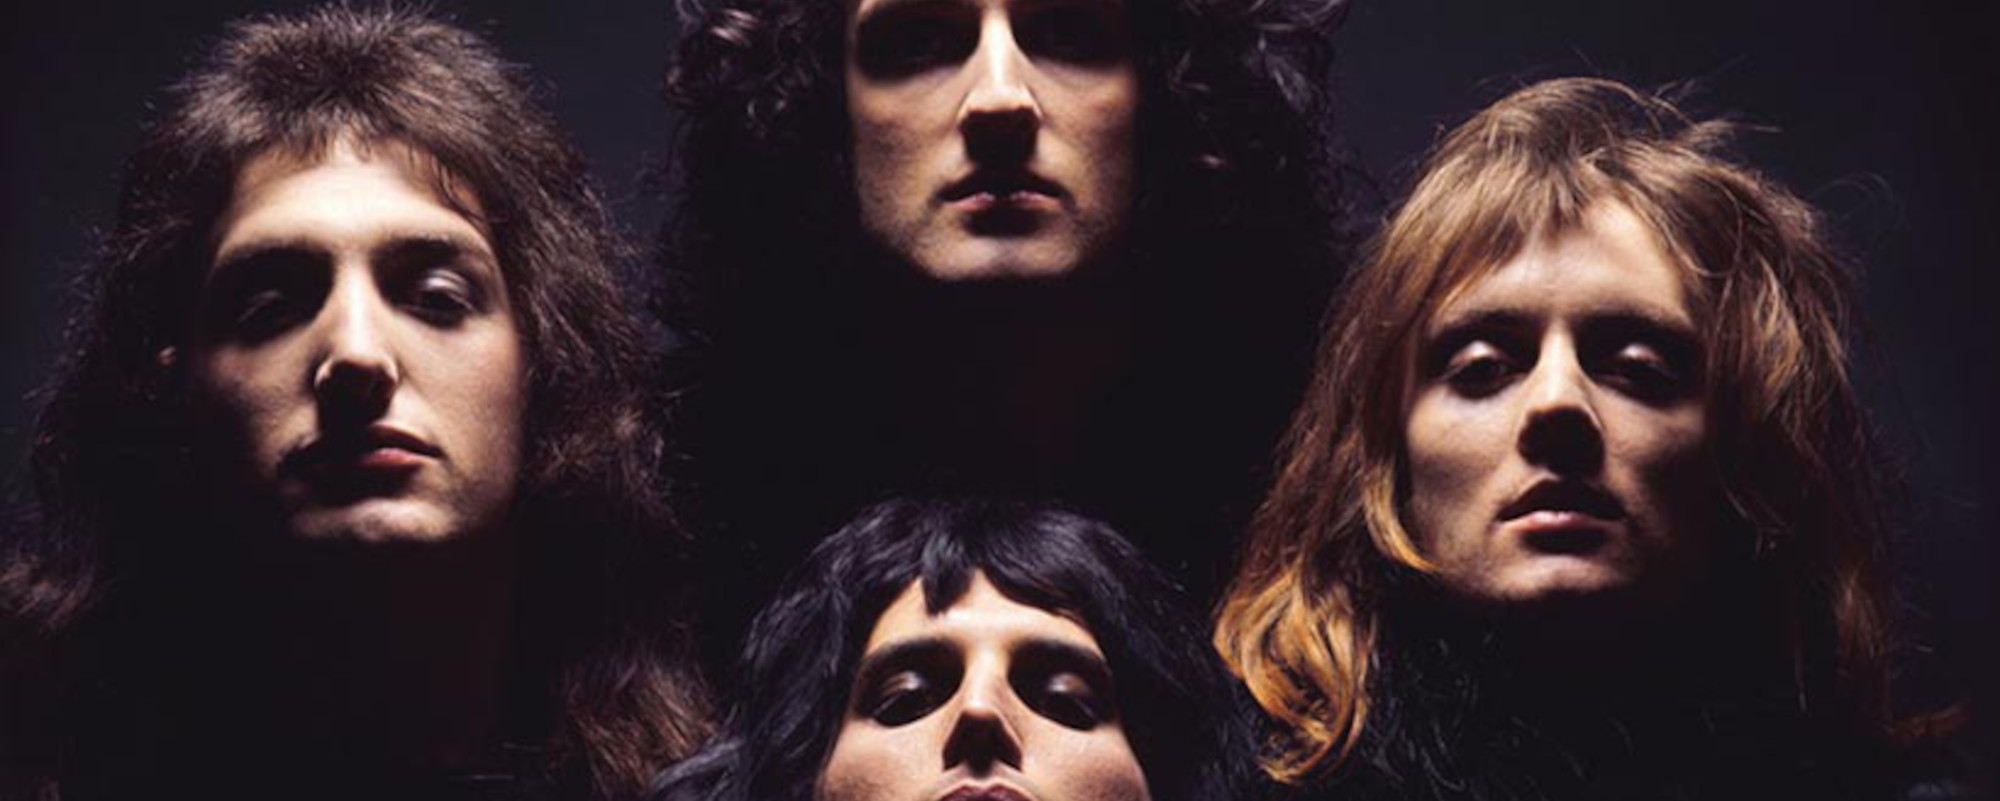 The Story Behind the Famous ‘Queen II’ Album Cover